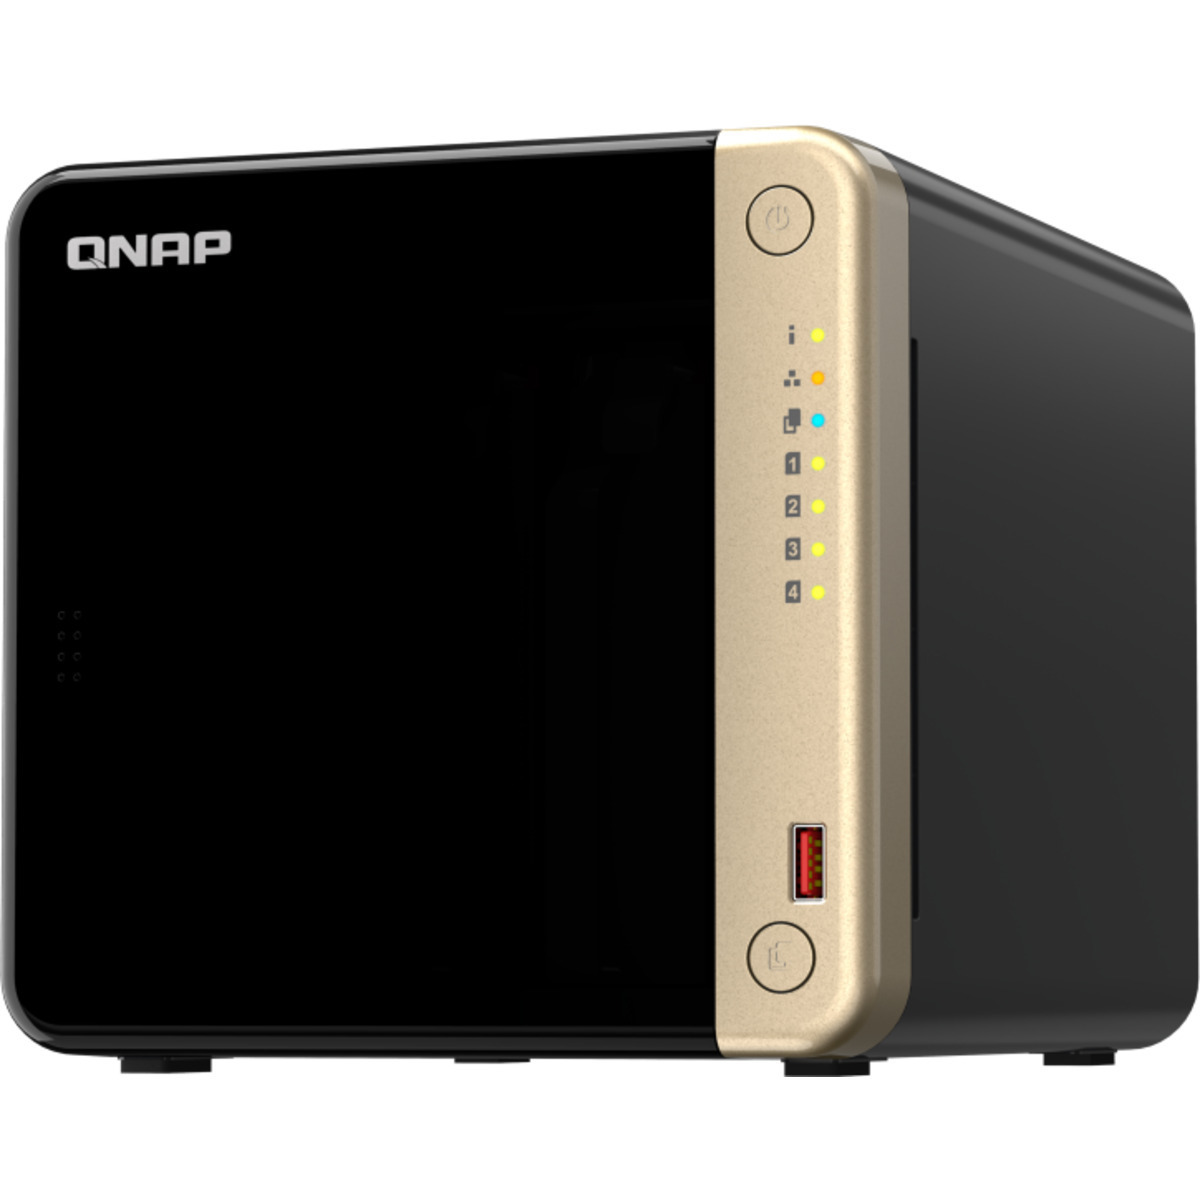 buy QNAP TS-464 8tb Desktop NAS - Network Attached Storage Device 4x2000gb Seagate IronWolf Pro ST2000NT001 3.5 7200rpm SATA 6Gb/s HDD NAS Class Drives Installed - Burn-In Tested - ON SALE - nas headquarters buy network attached storage server device das new raid-5 free shipping usa spring sale TS-464